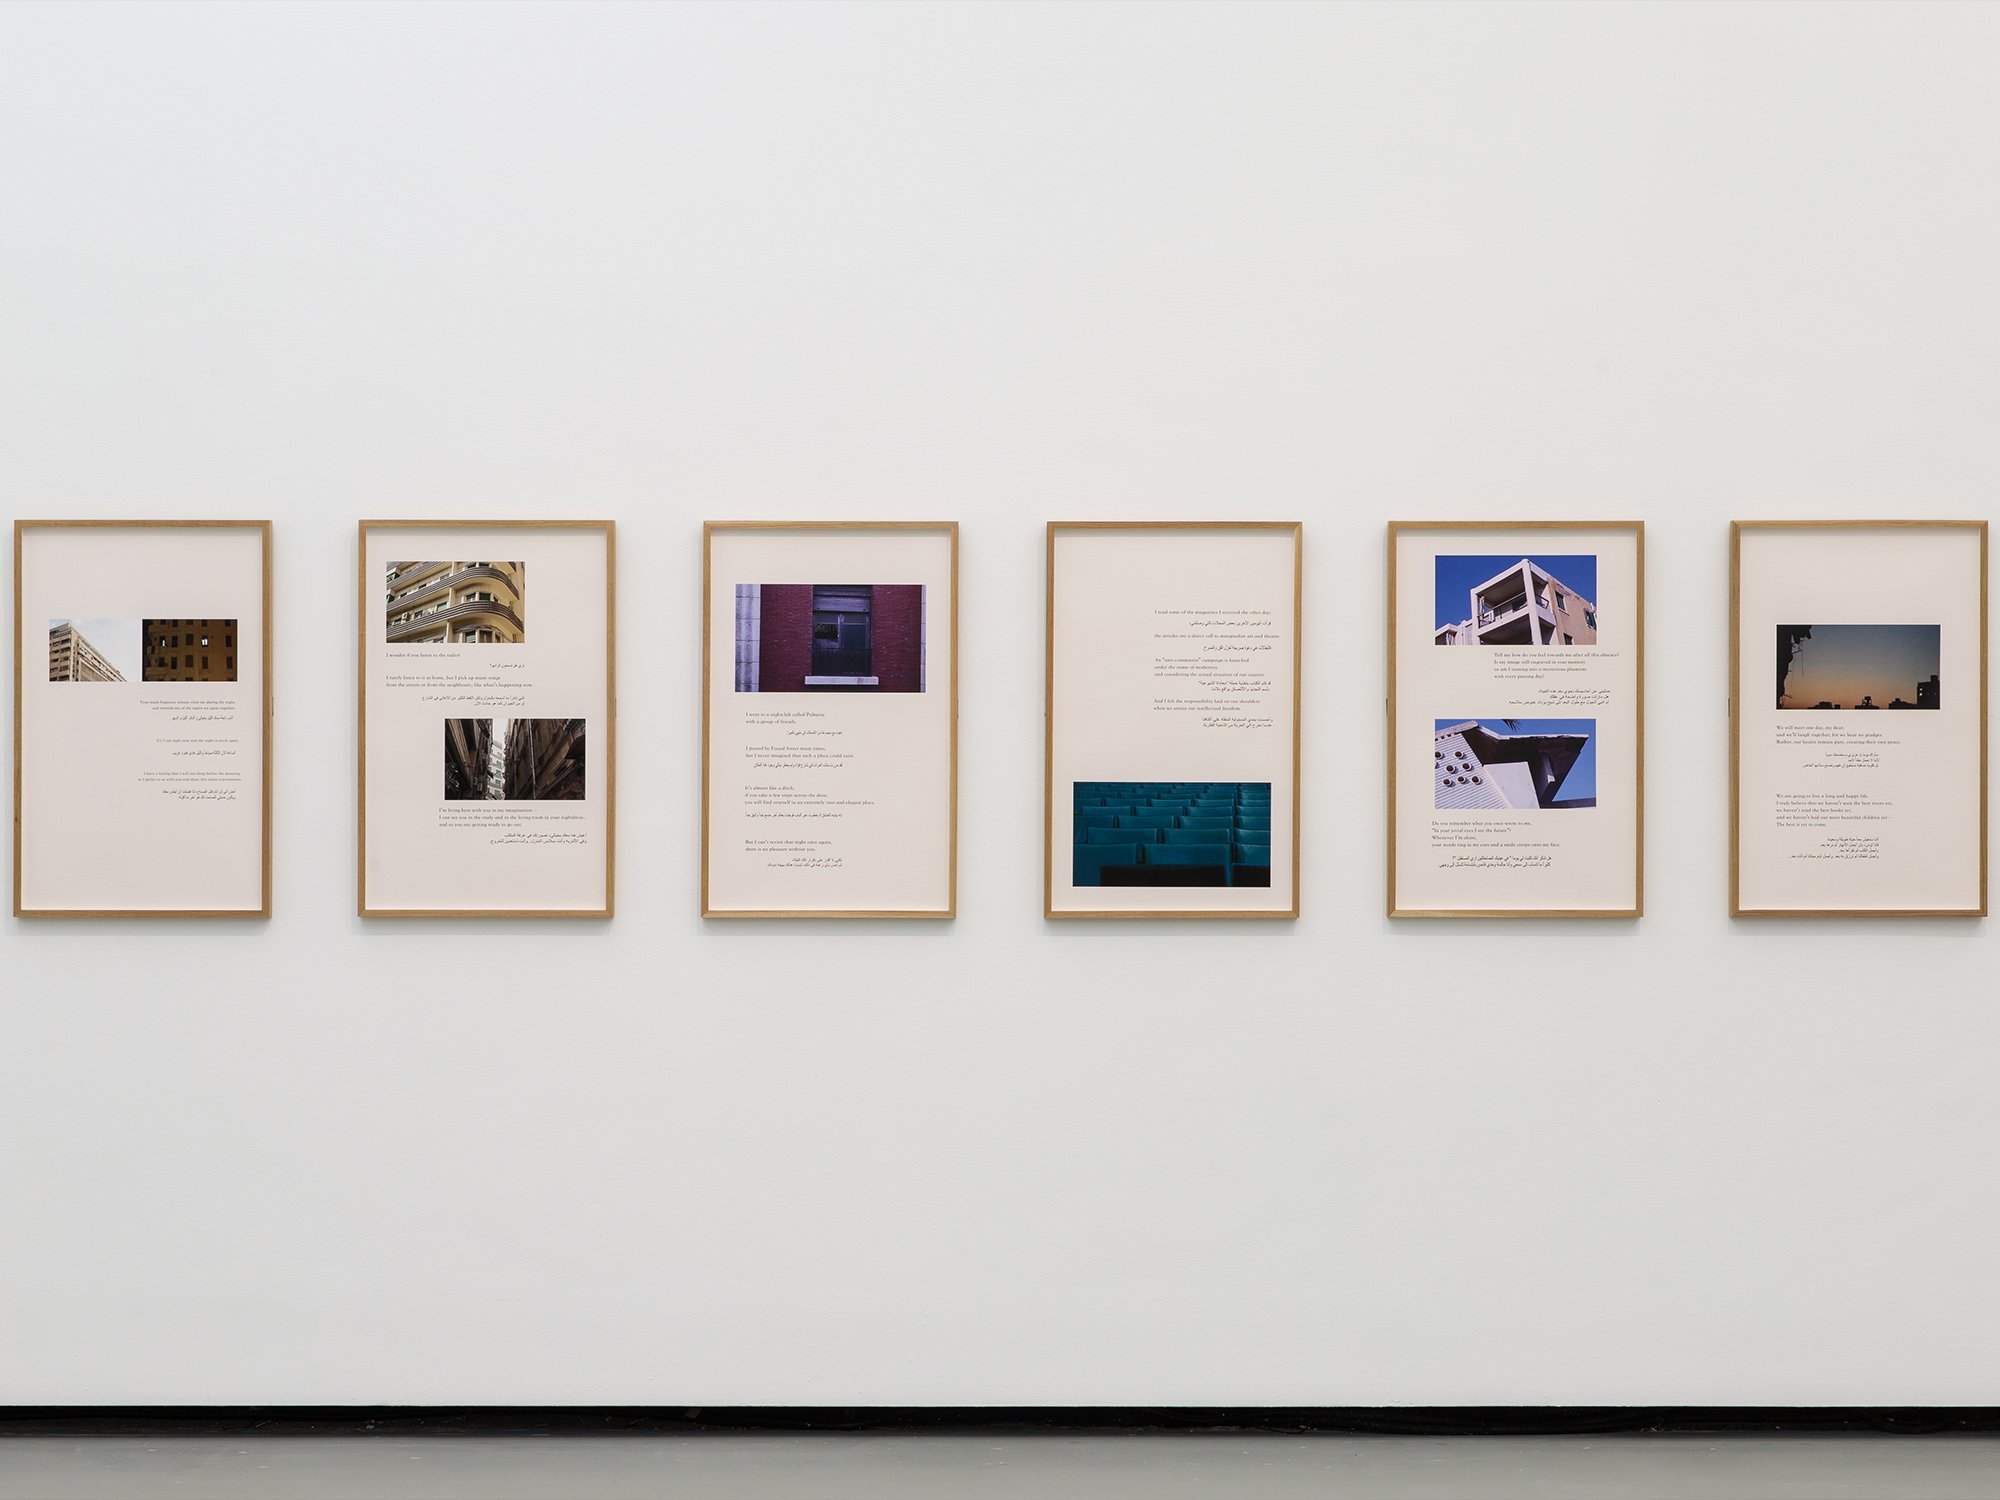  31 Silent Encounters, film stills, 50x80 cm each, 2020, photo courtesy of Towner Eastbourne by Rob Hill. 